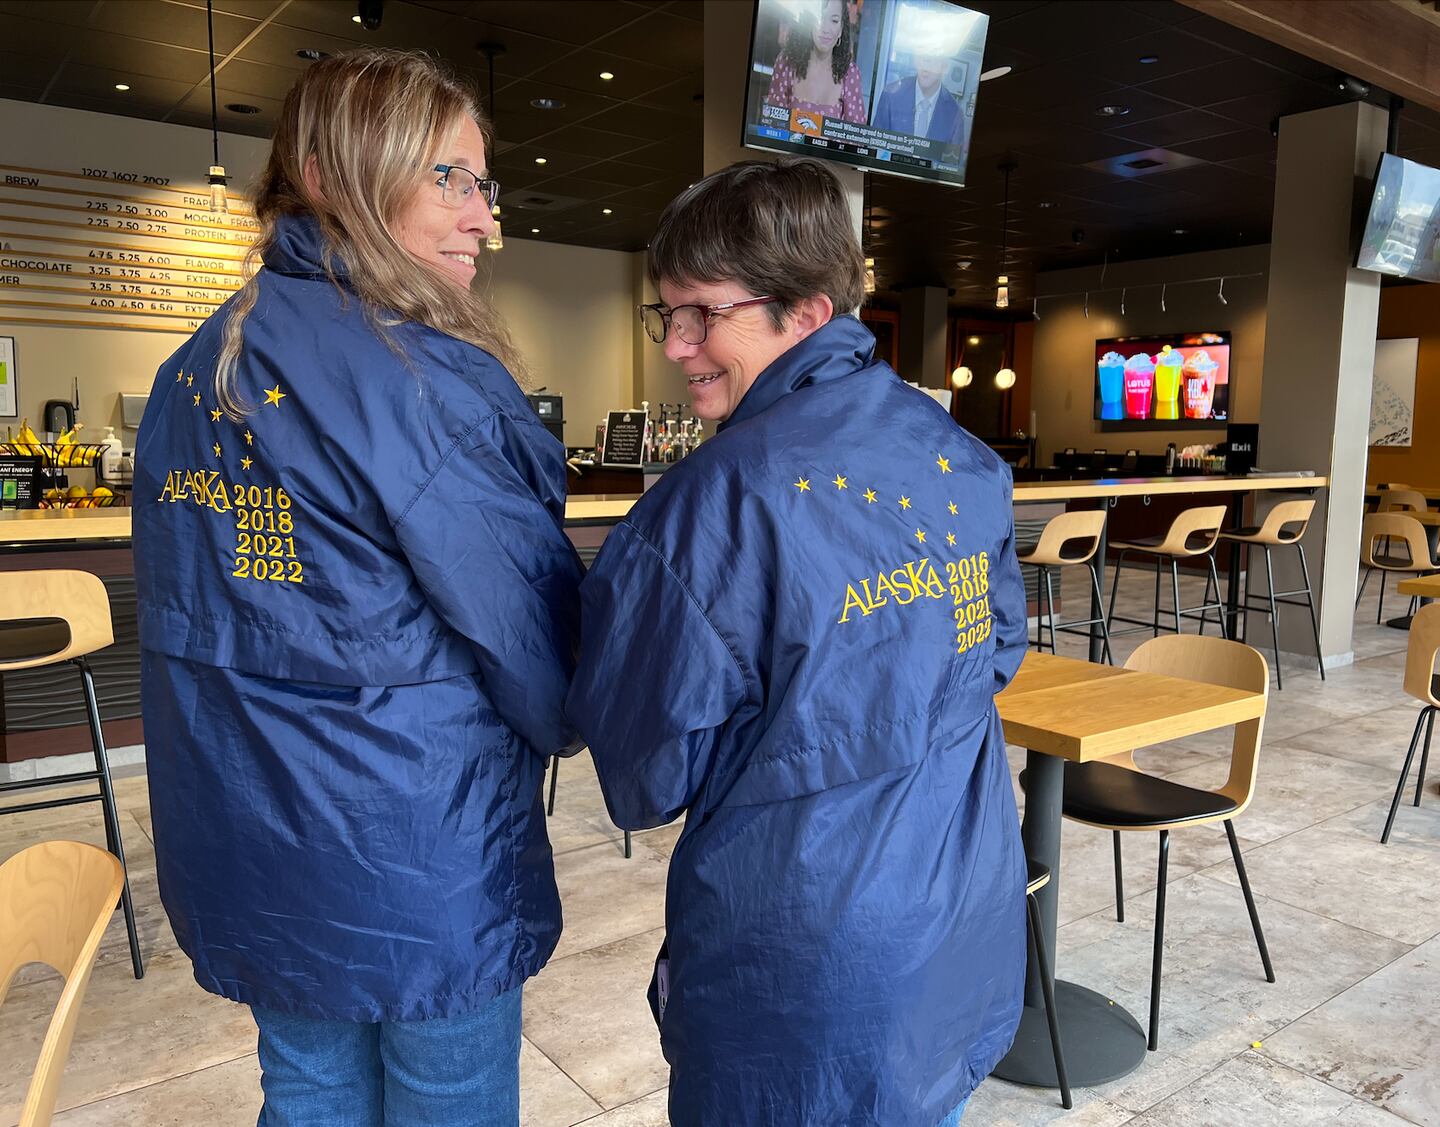 Two travelers pose with their “John Hall’s Alaska” jackets